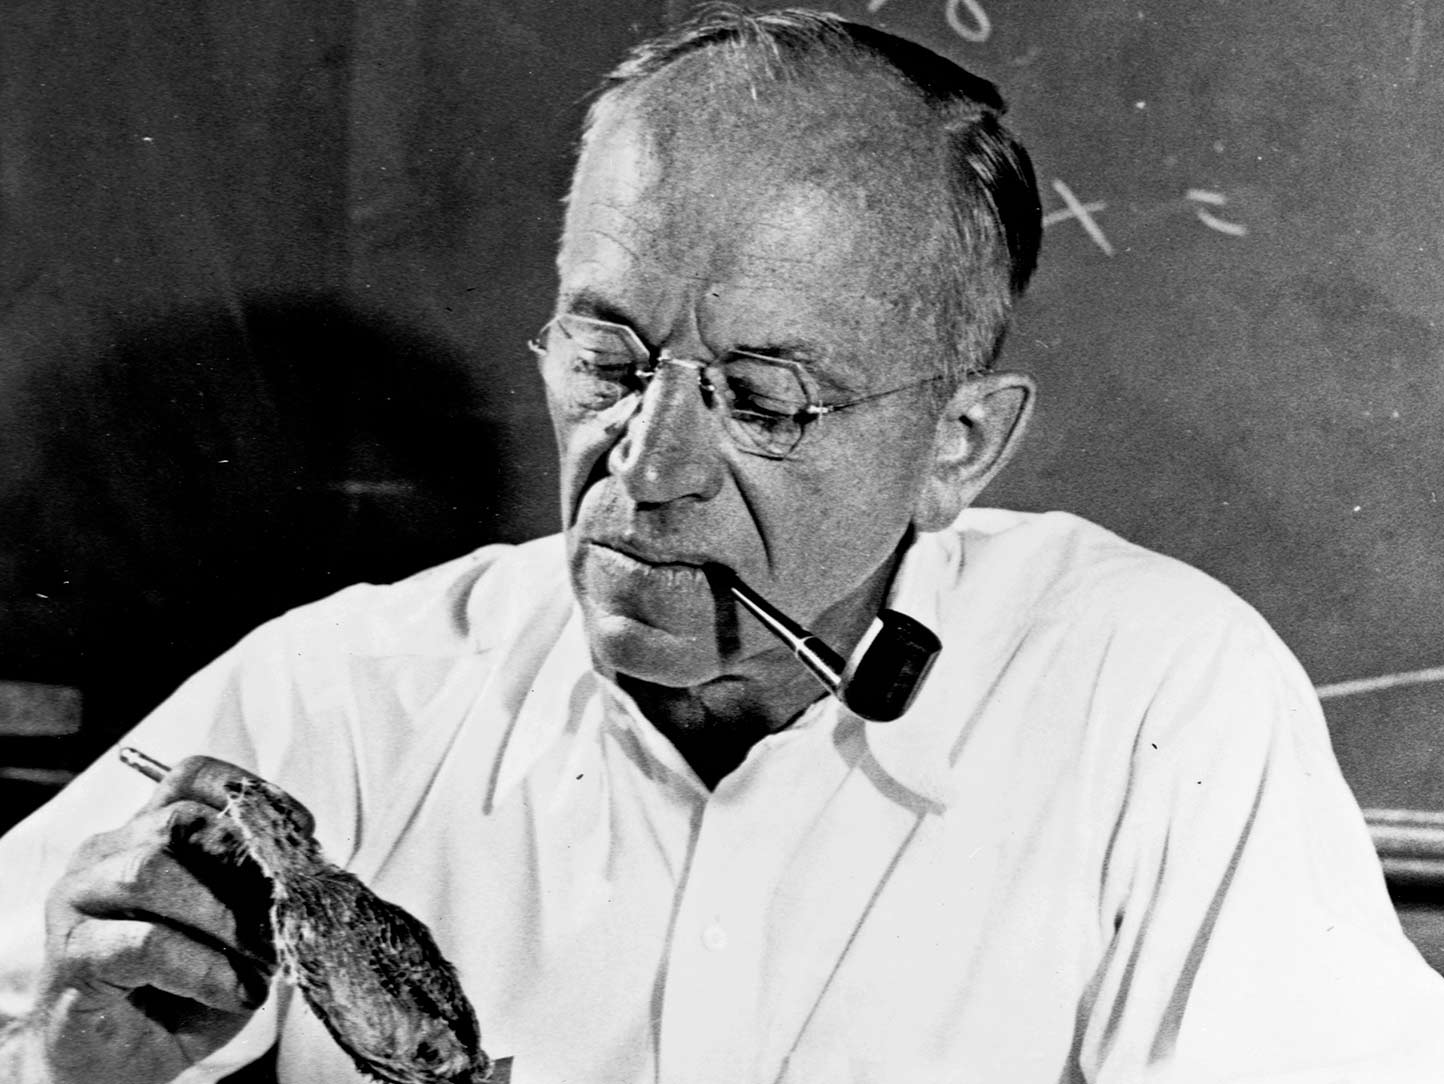 A black and white photo of a man holding specimens.